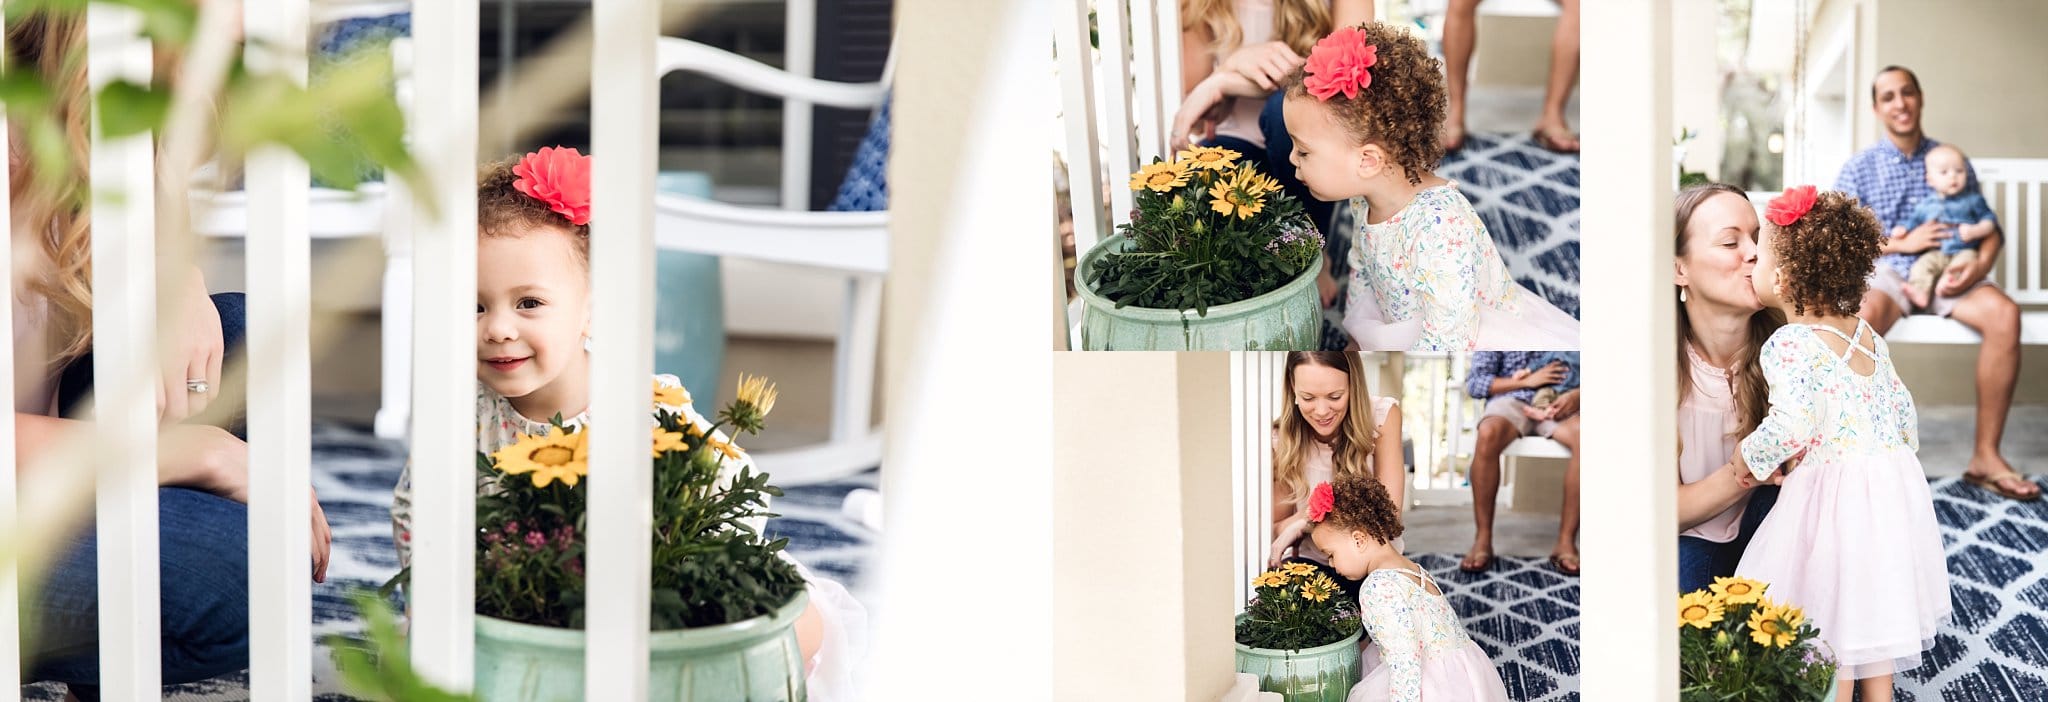 St Augustine Lifestyle Photographer toddle girl smelling flowers on fron porch as mom looks on.